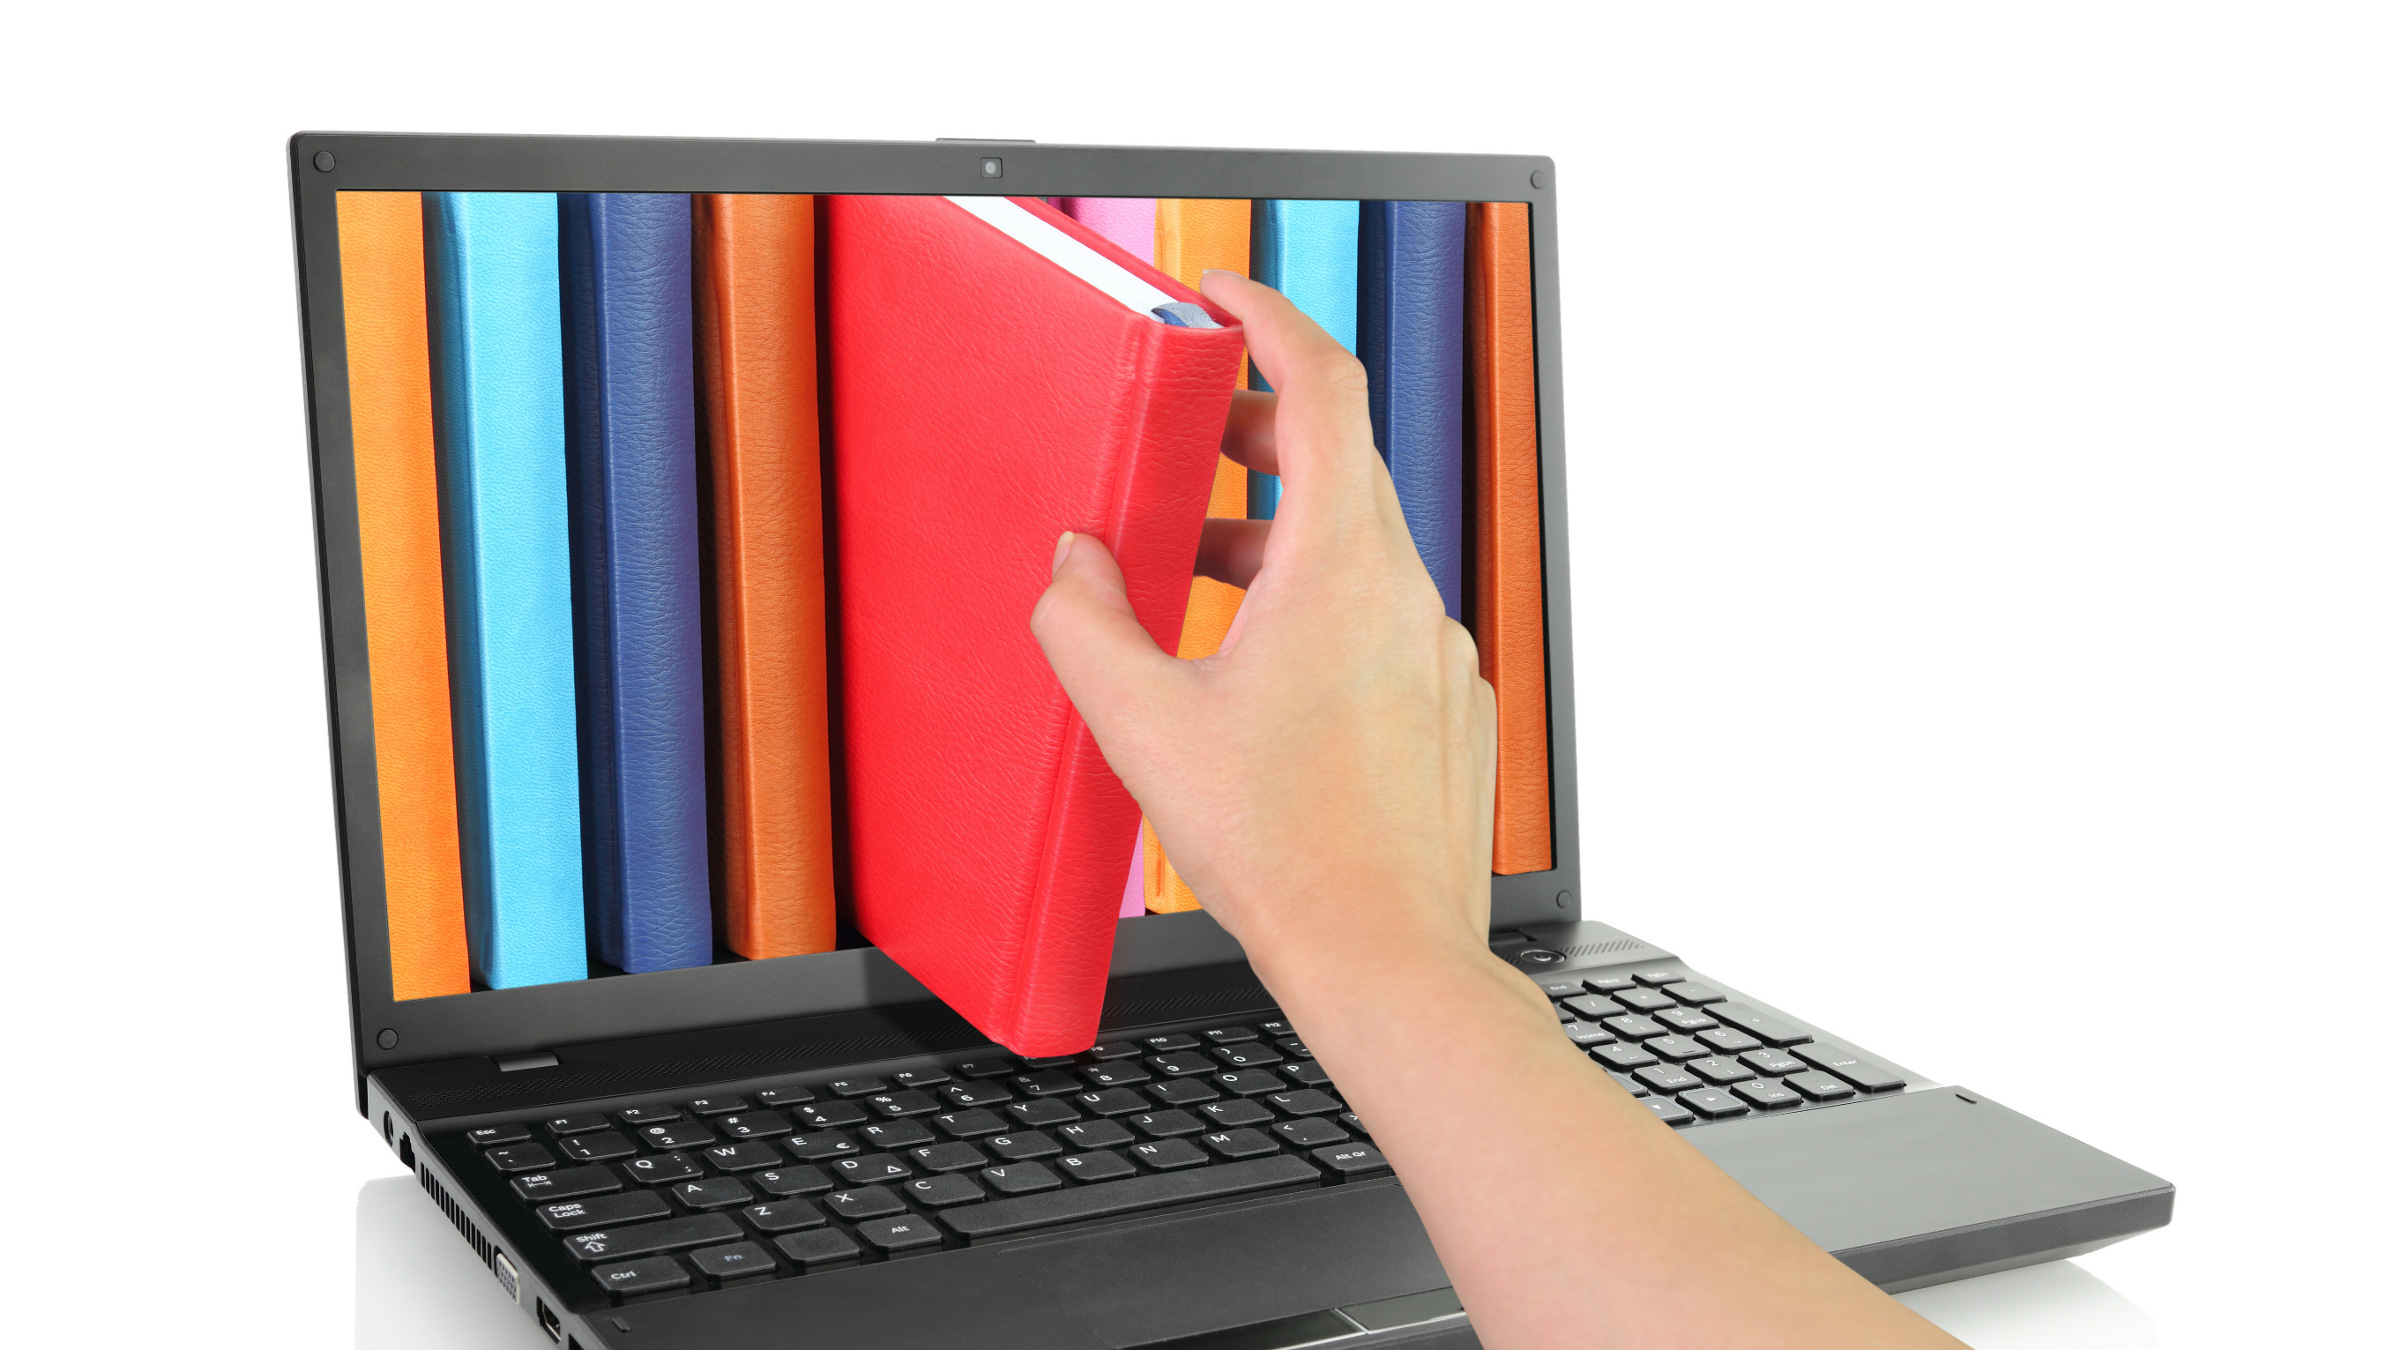 hand pulling a book from a laptop computer screen